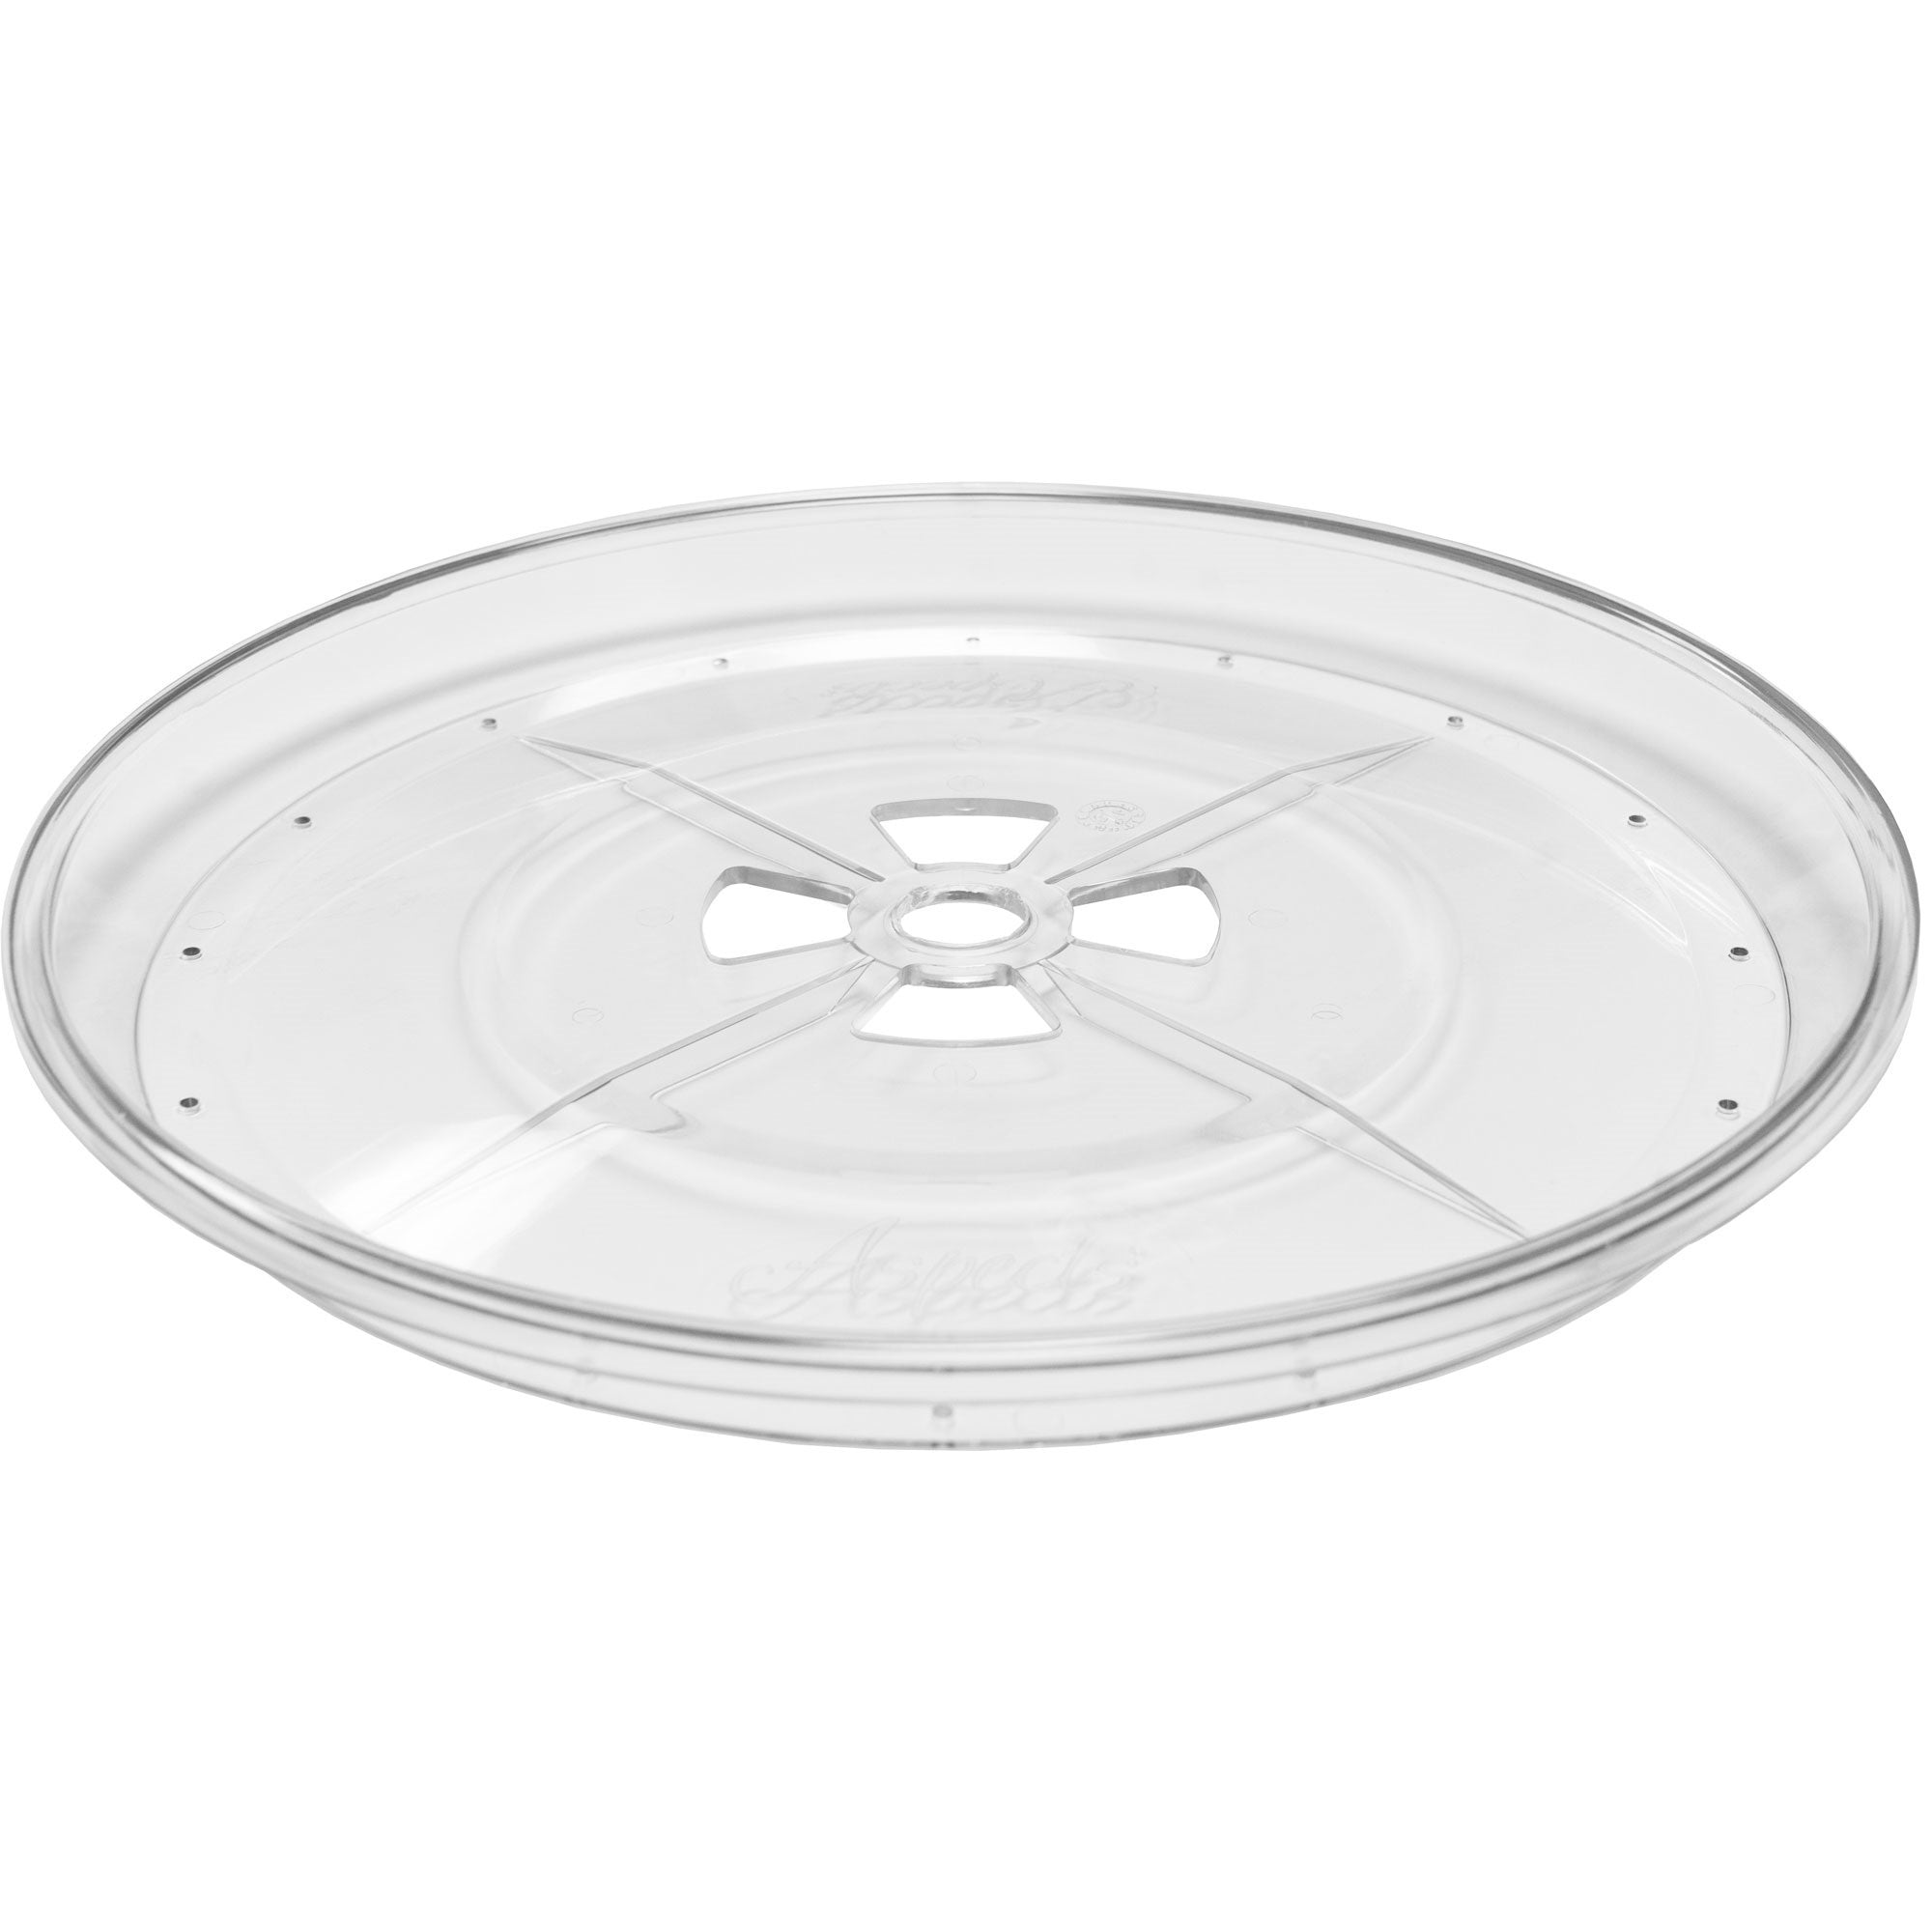 Aspects (ASP423) Quick Clean Bigfoot Seed Tray, 12 diameter